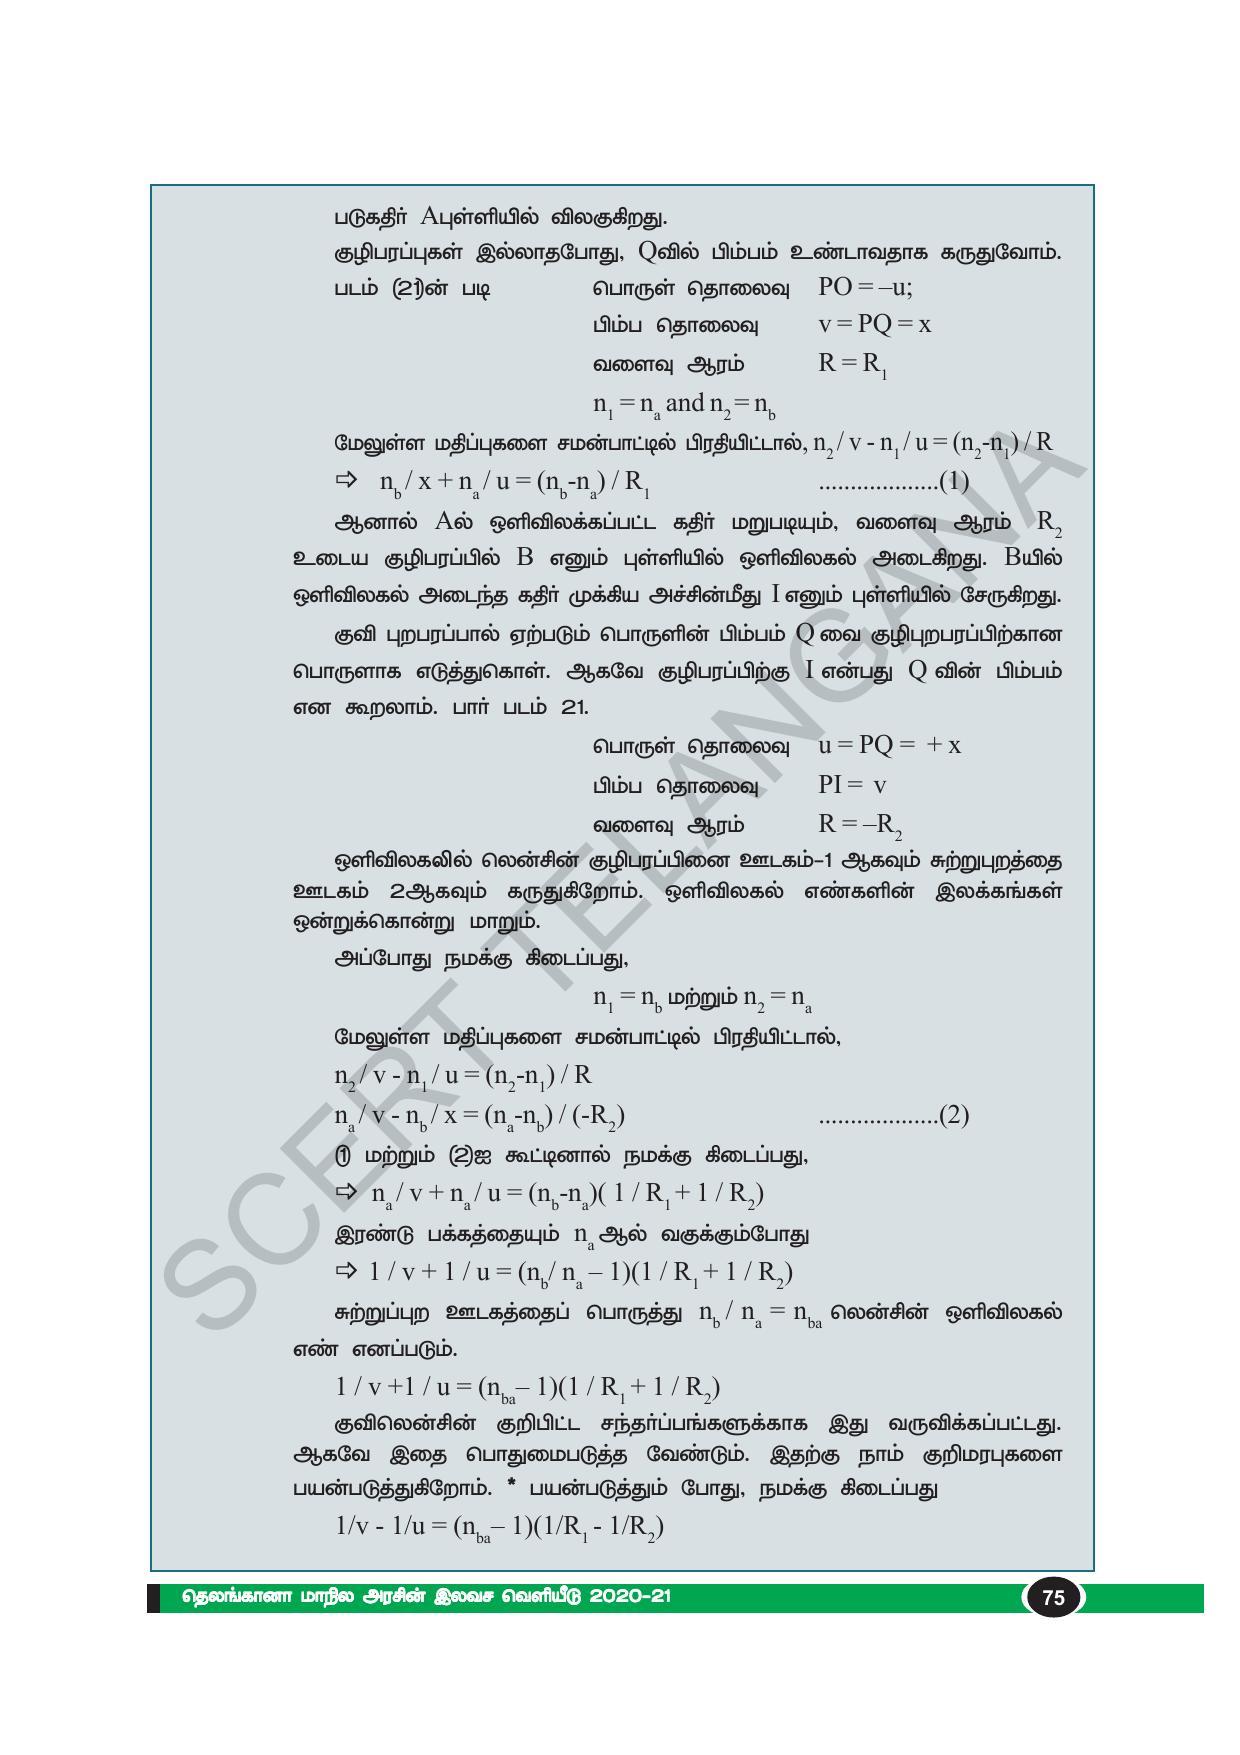 TS SCERT Class 10 Physical Science(Tamil Medium) Text Book - Page 87